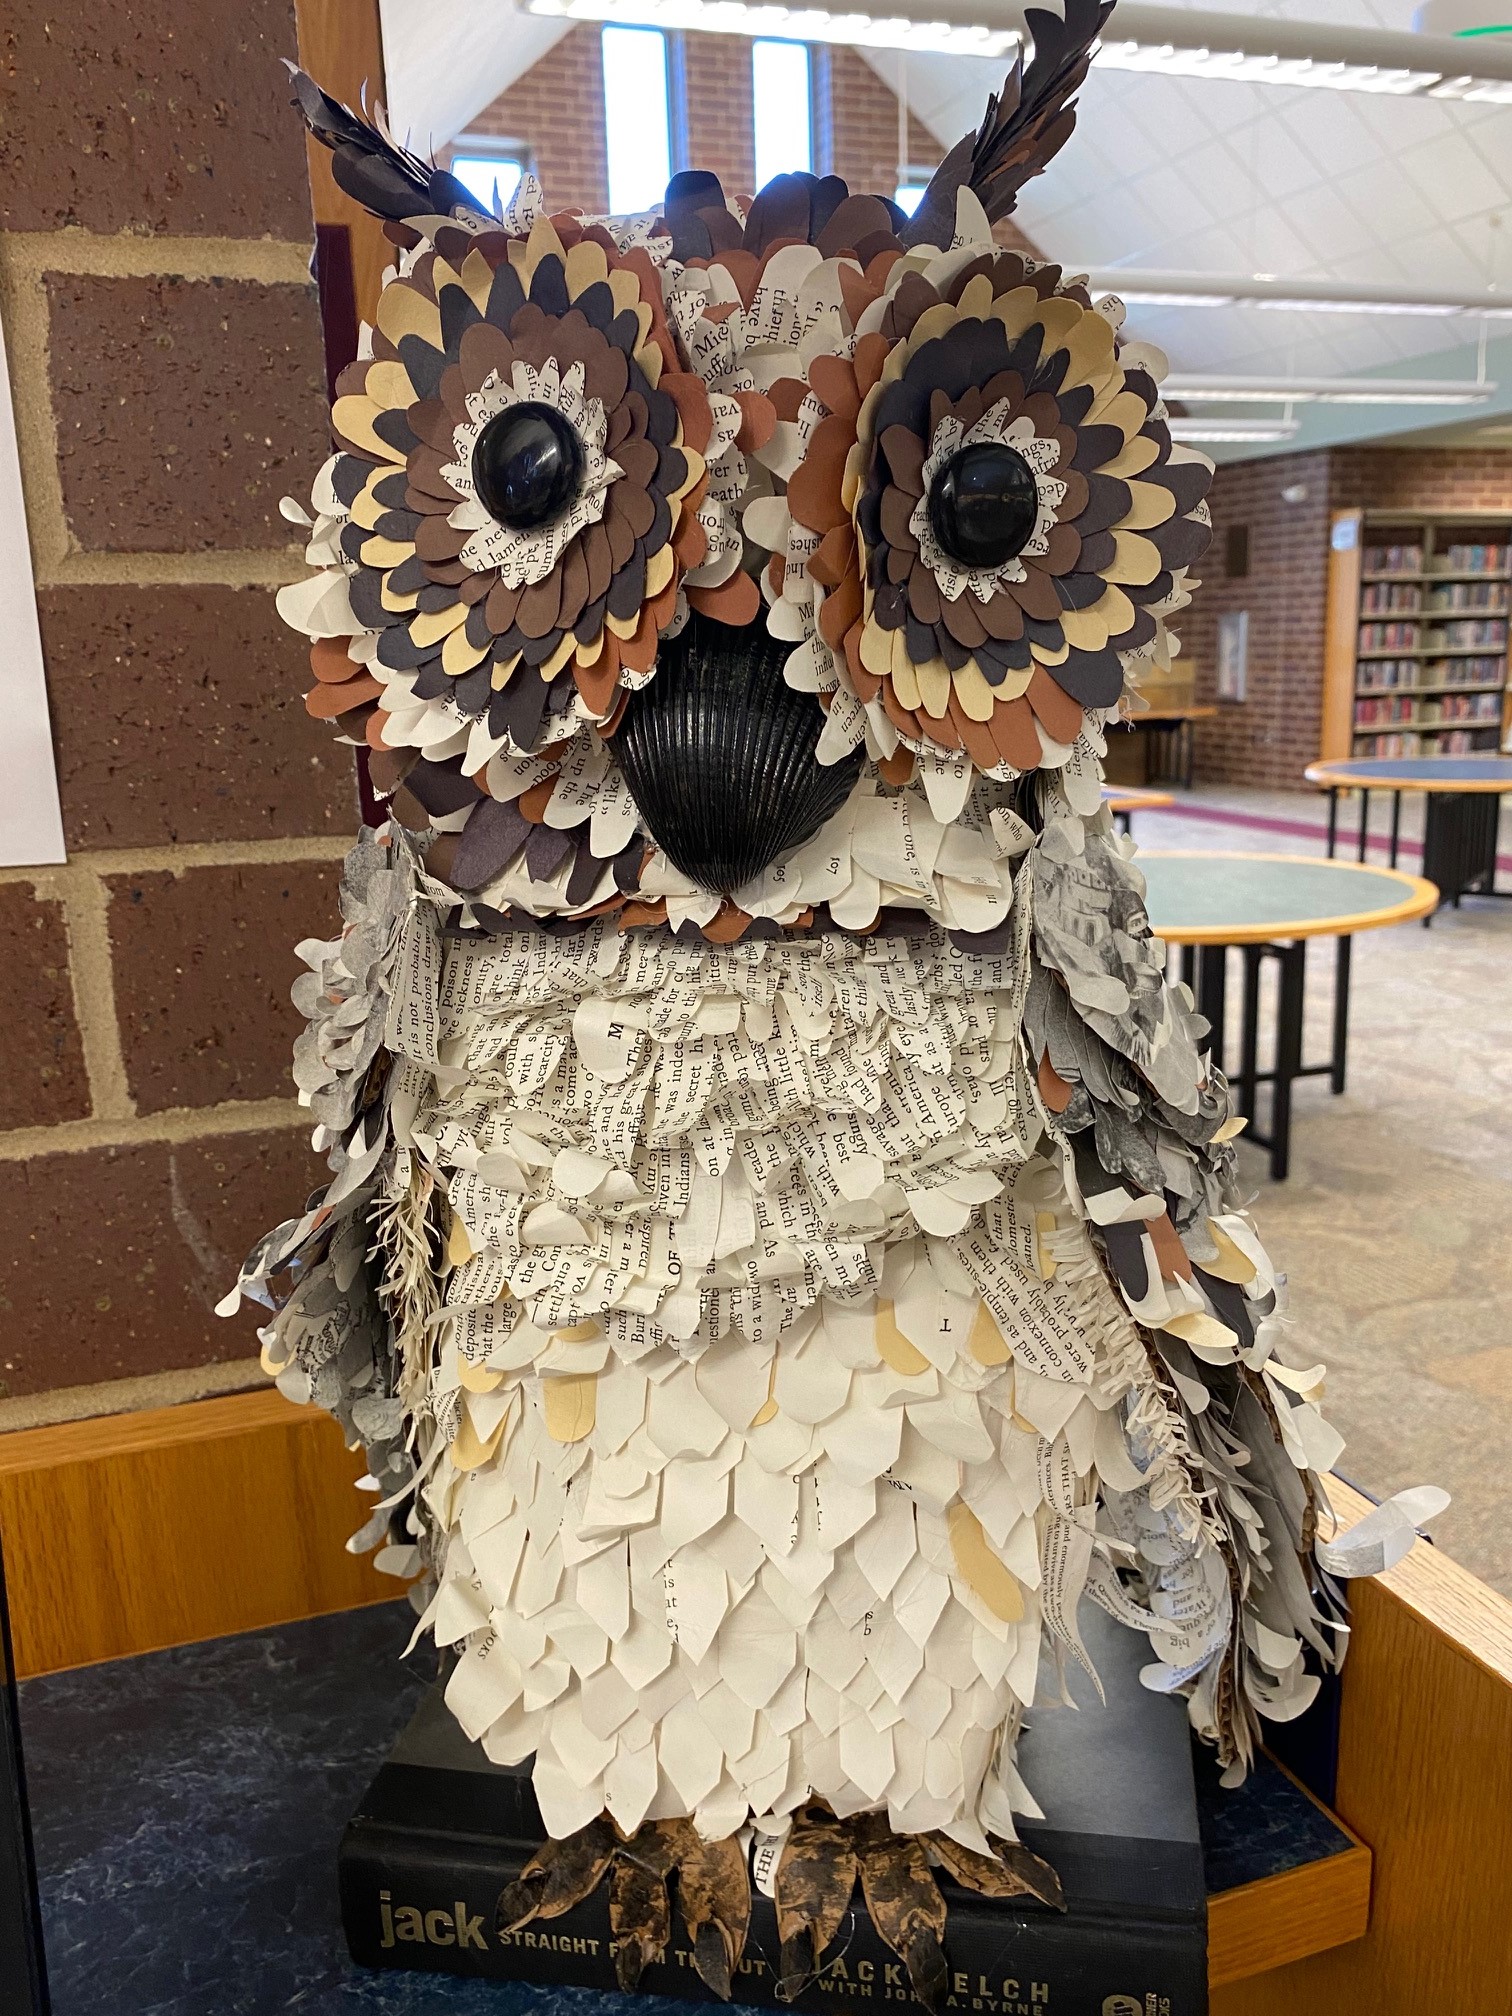 A 3D owl made of the pages of a discarded book